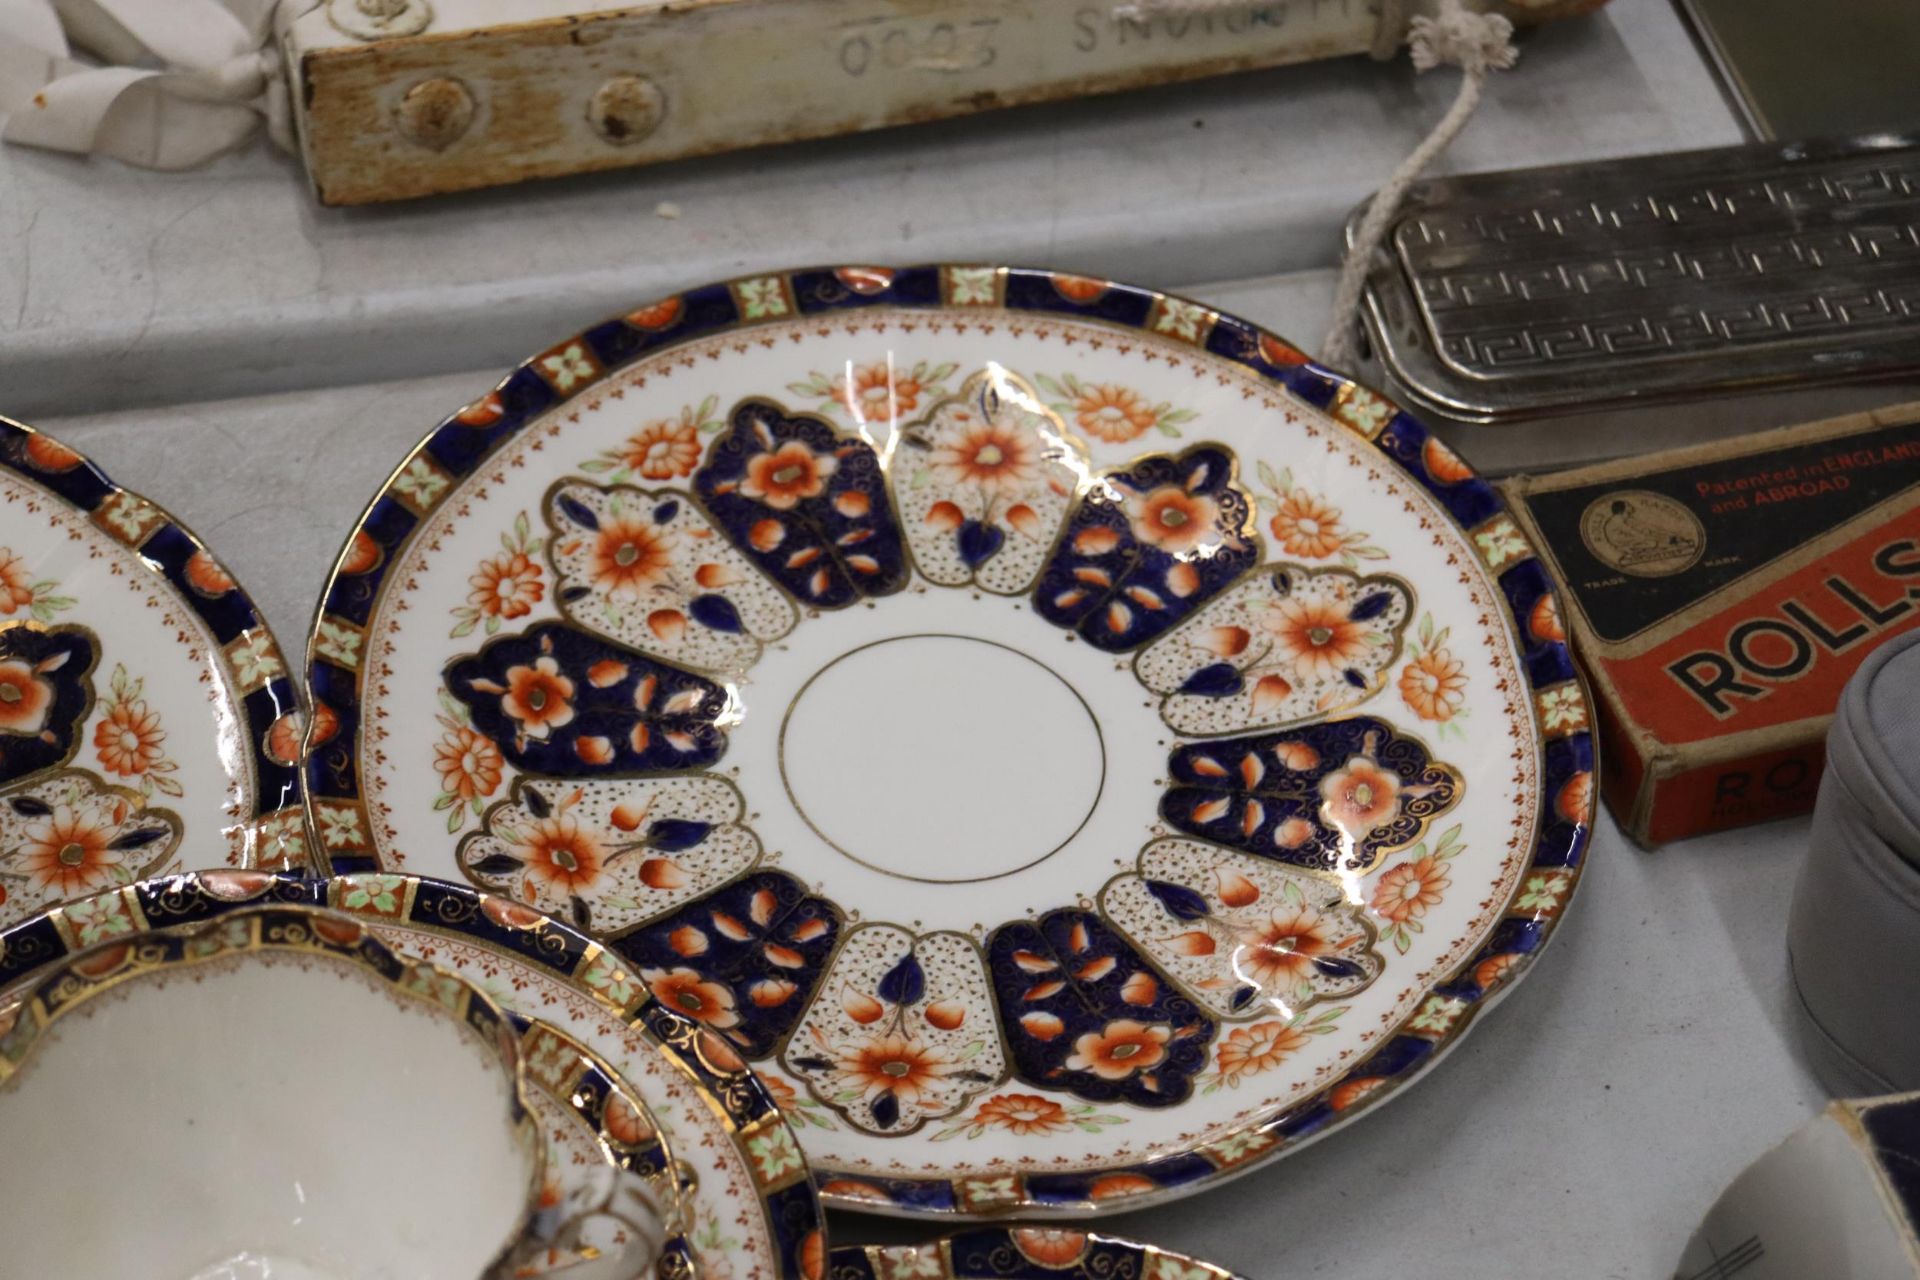 AN ANTIQUE 'COURT CHINA' TEASET TO INCLUDE CAKE PLATES, CUPS, SAUCERS, SIDE PLATES AND A SUGAR BOWL - Bild 6 aus 9